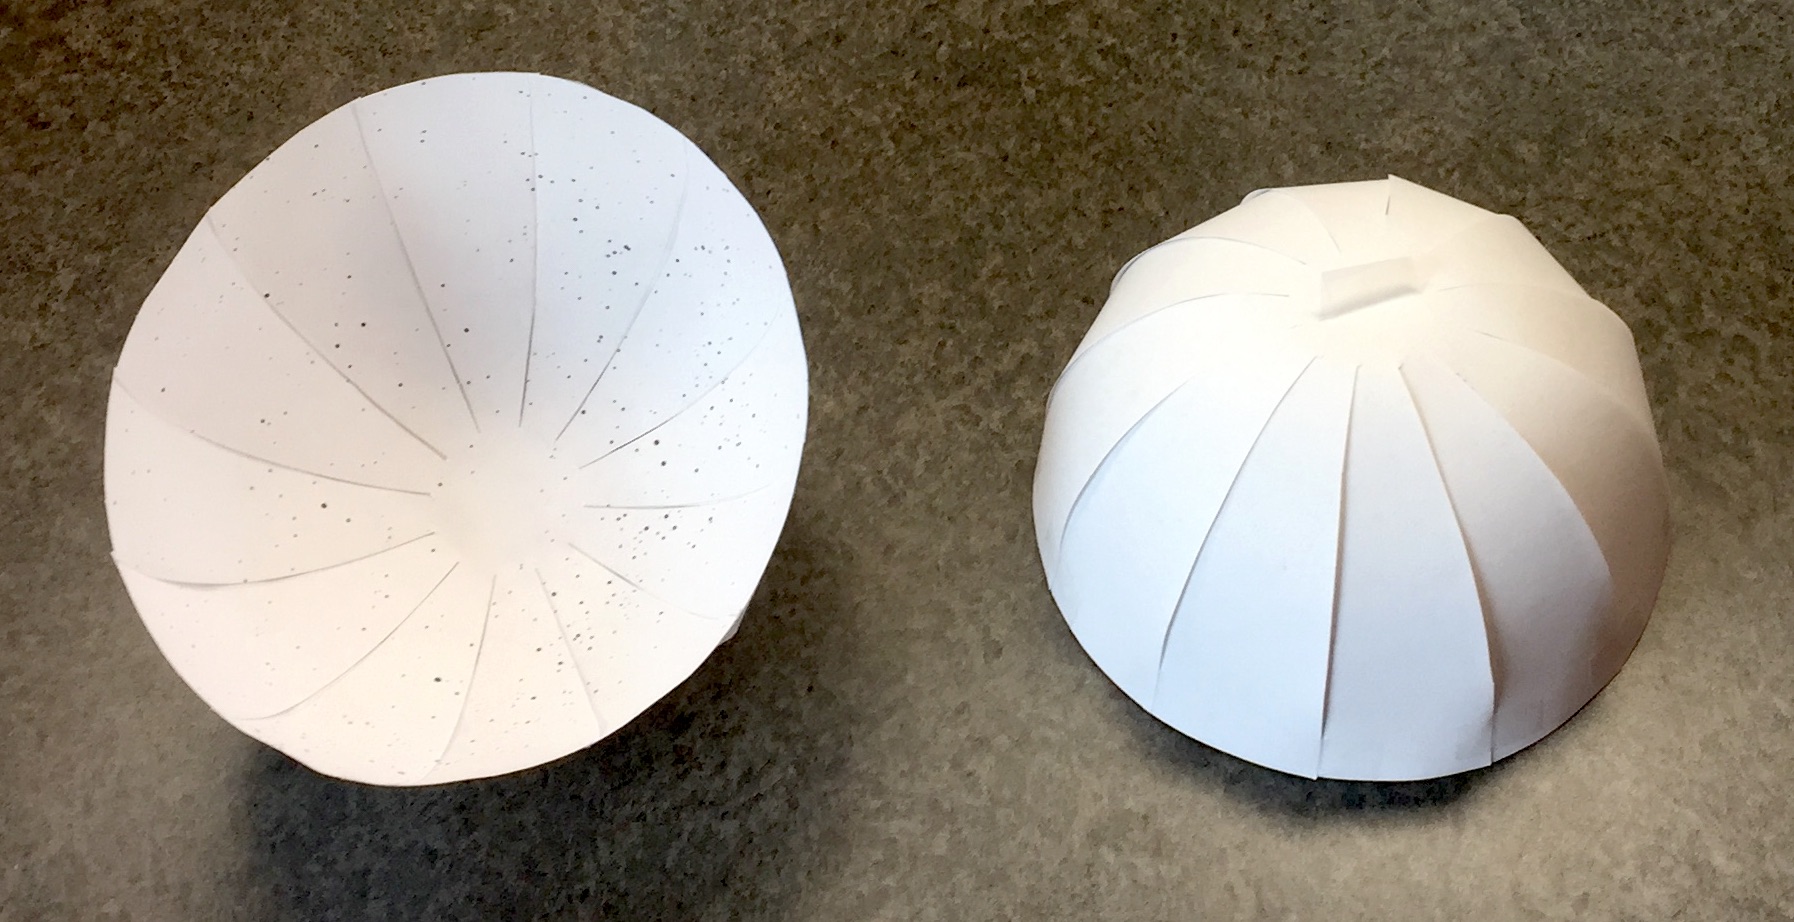 Two hemispheres made of paper, one showing the inside printed with stars, the other showing the outside